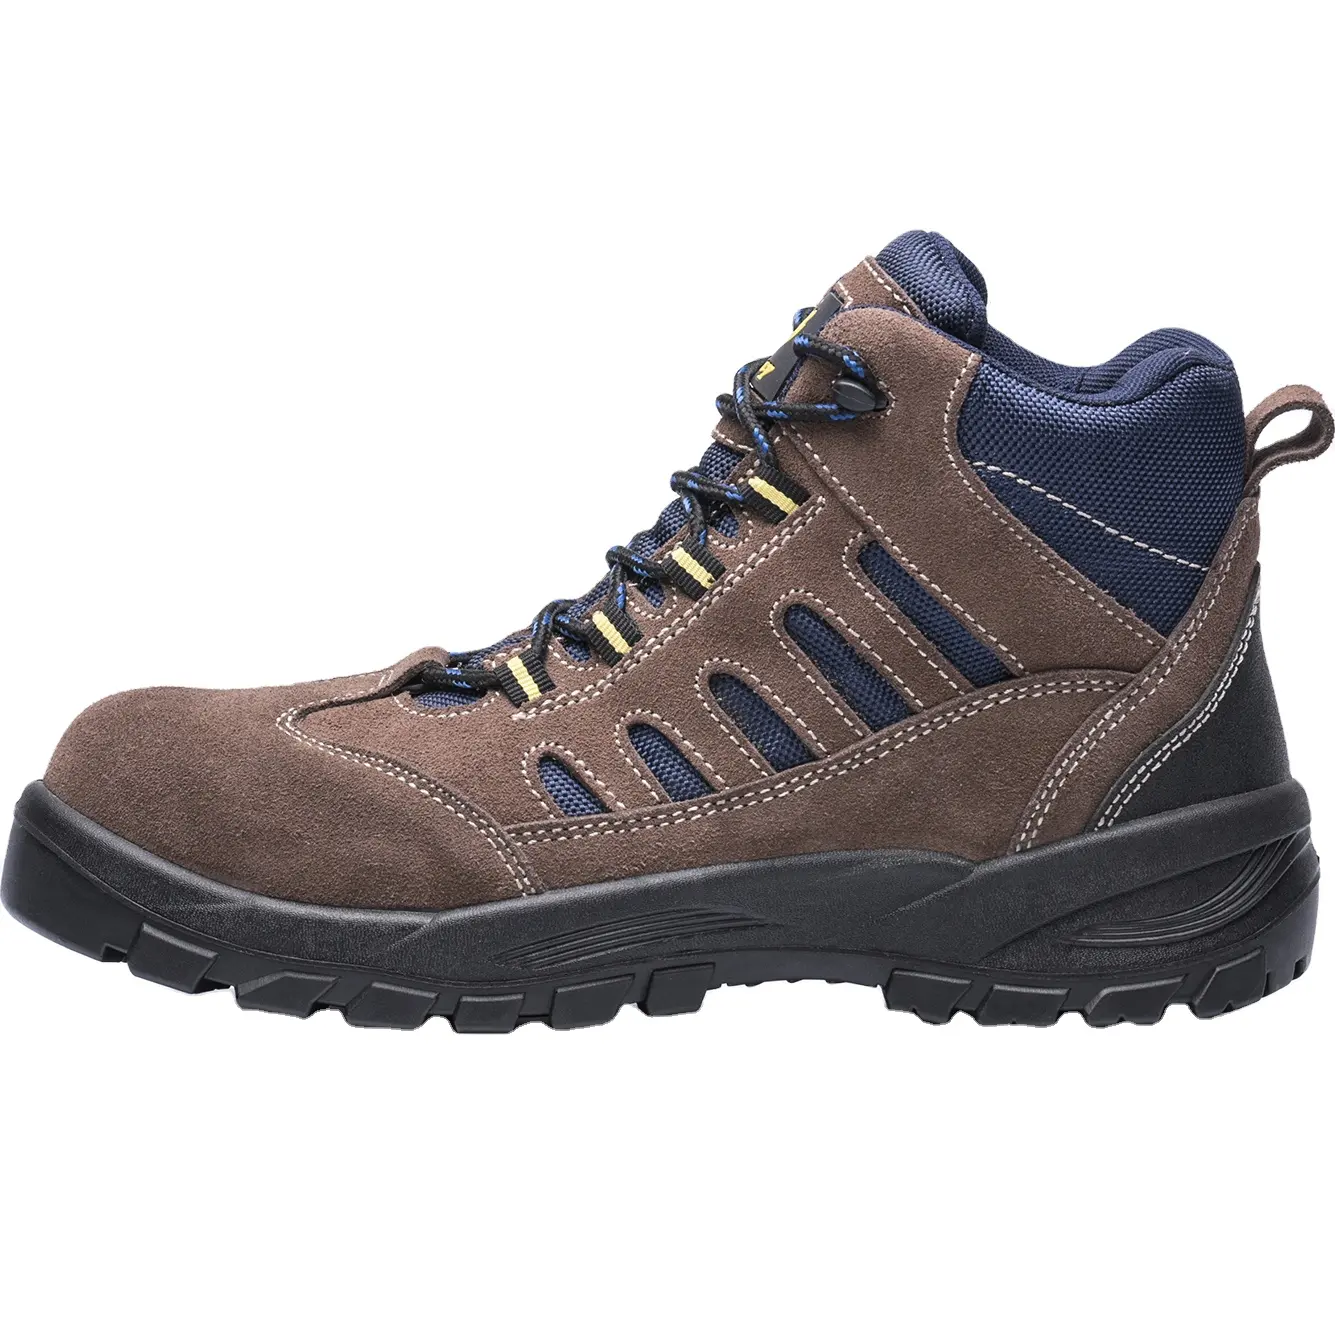 waterproof anti Slip steel toe functional safety shoes work boots S3 for men industrial